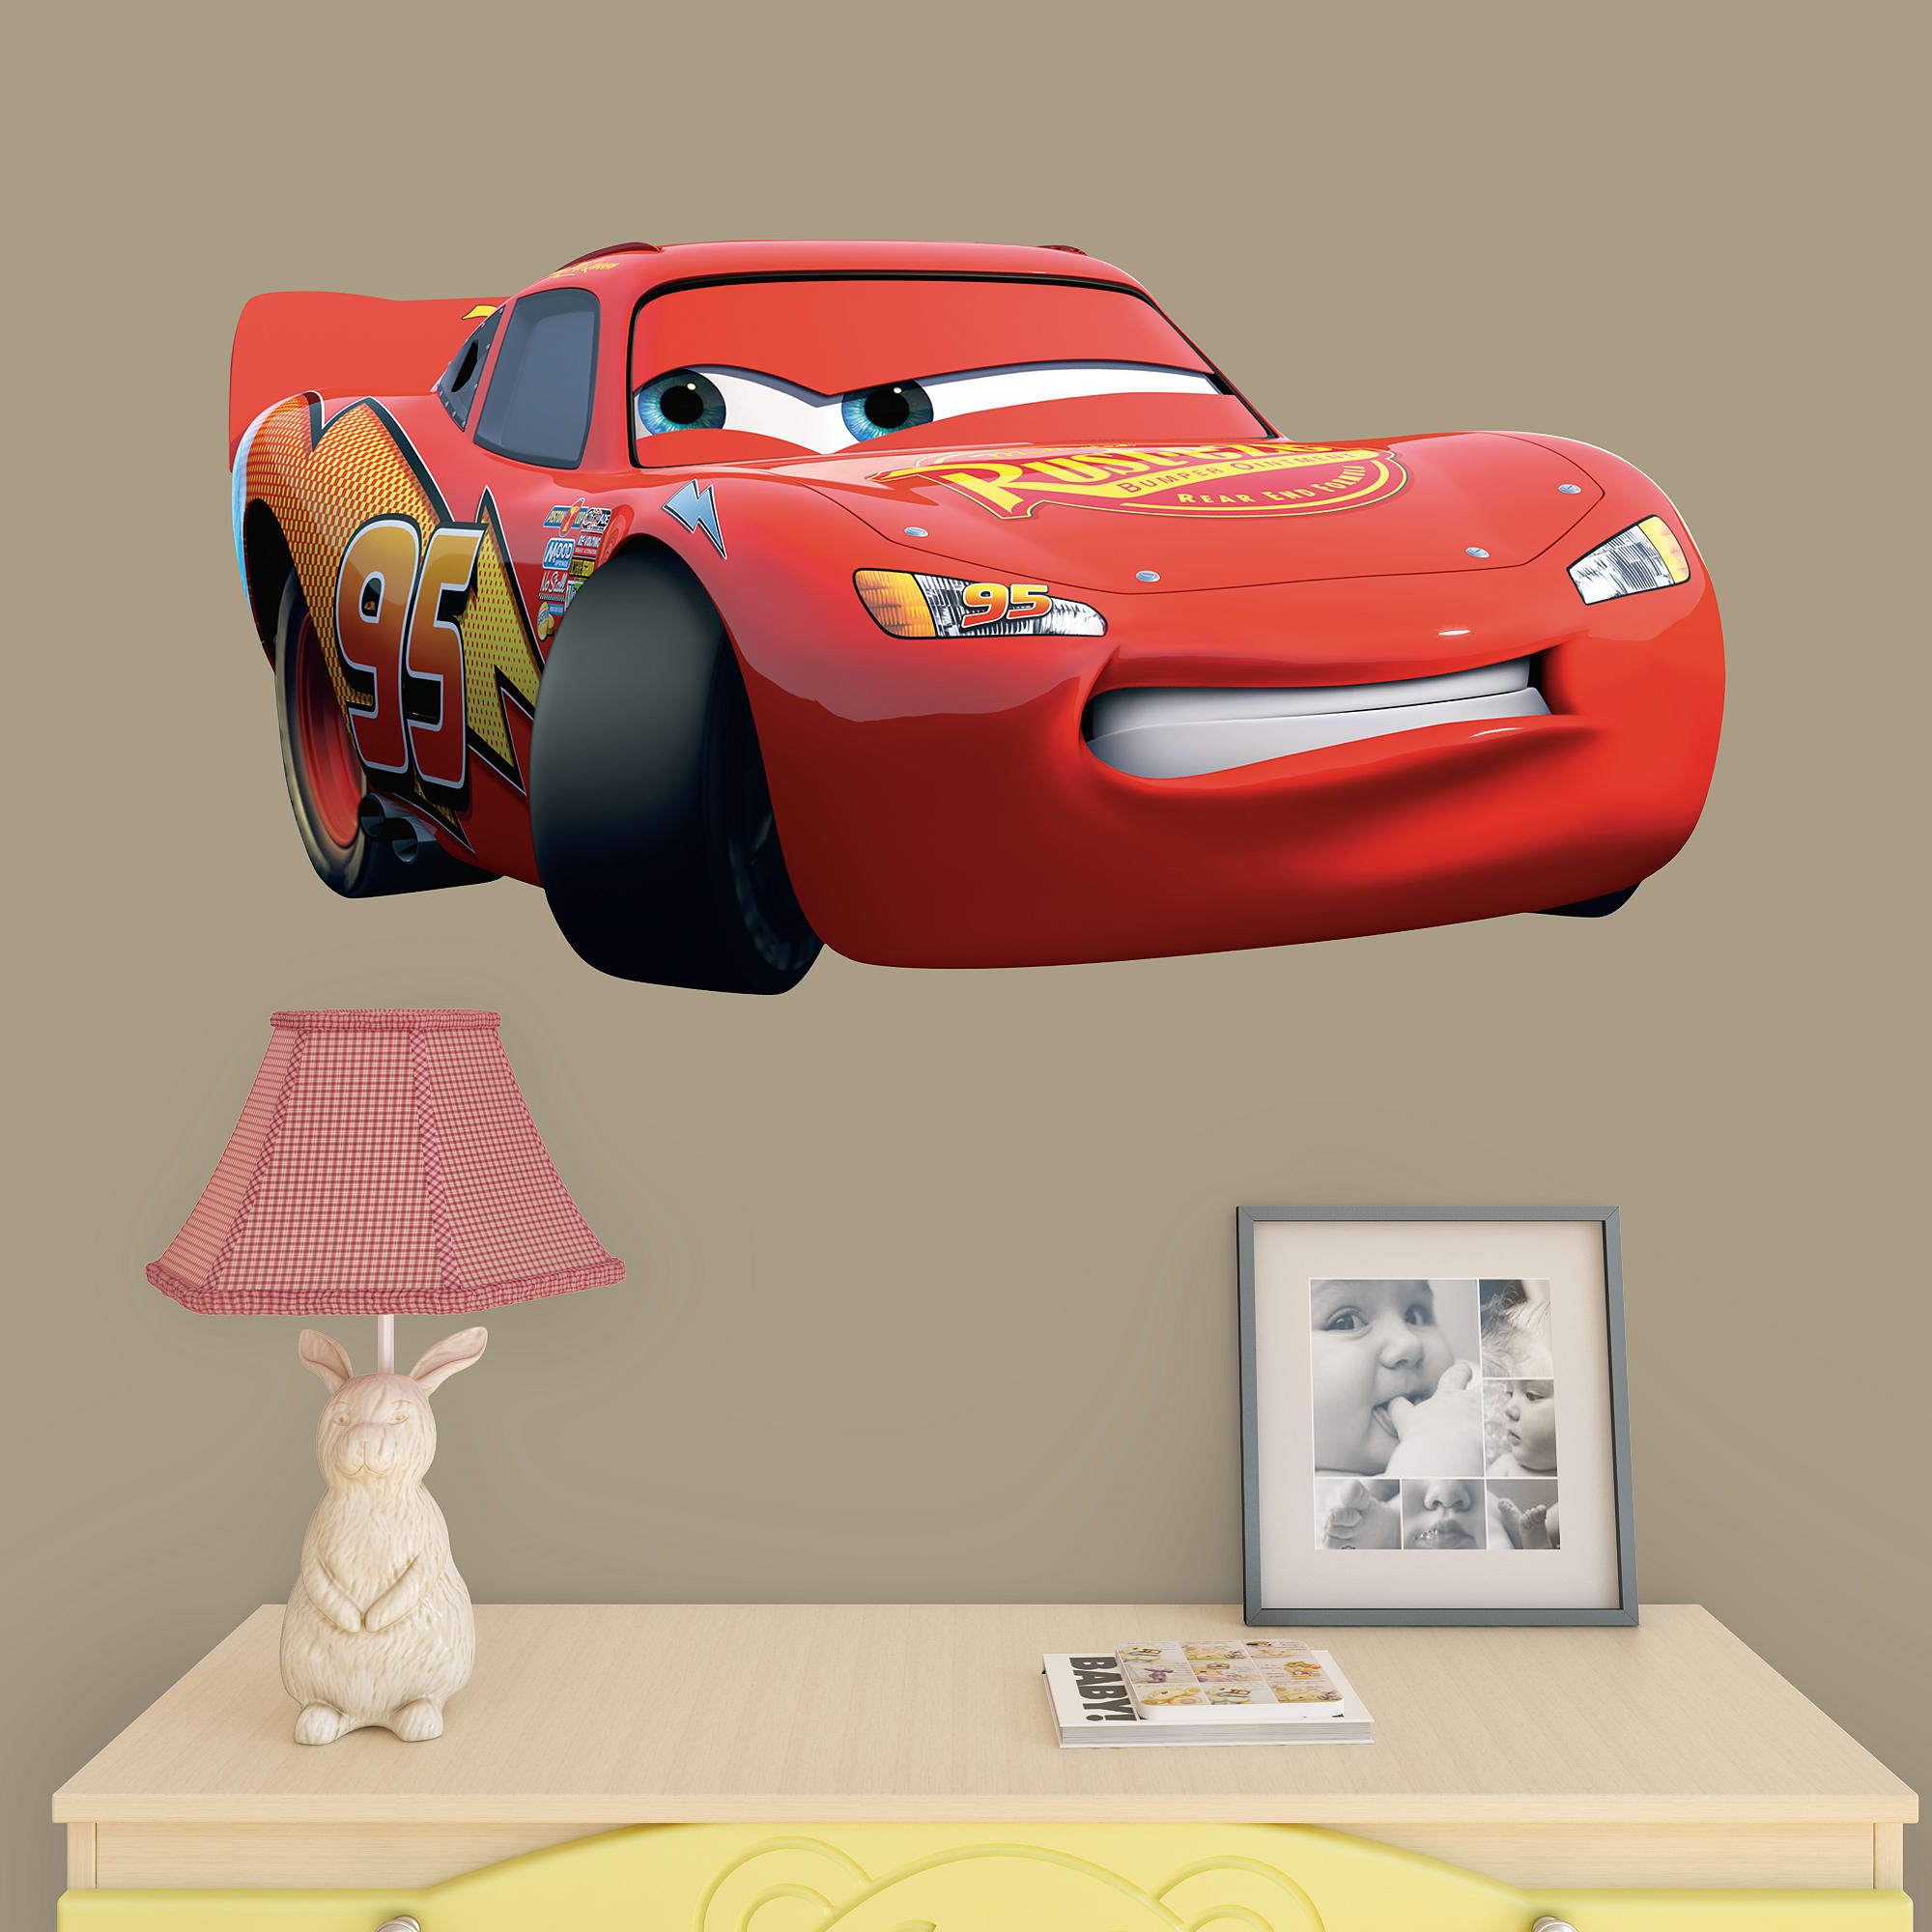 Lightning McQueen: Cars 3 - Officially Licensed Disney Removable Wall Decal 39.0"W x 20.0"H by Fathead | Vinyl